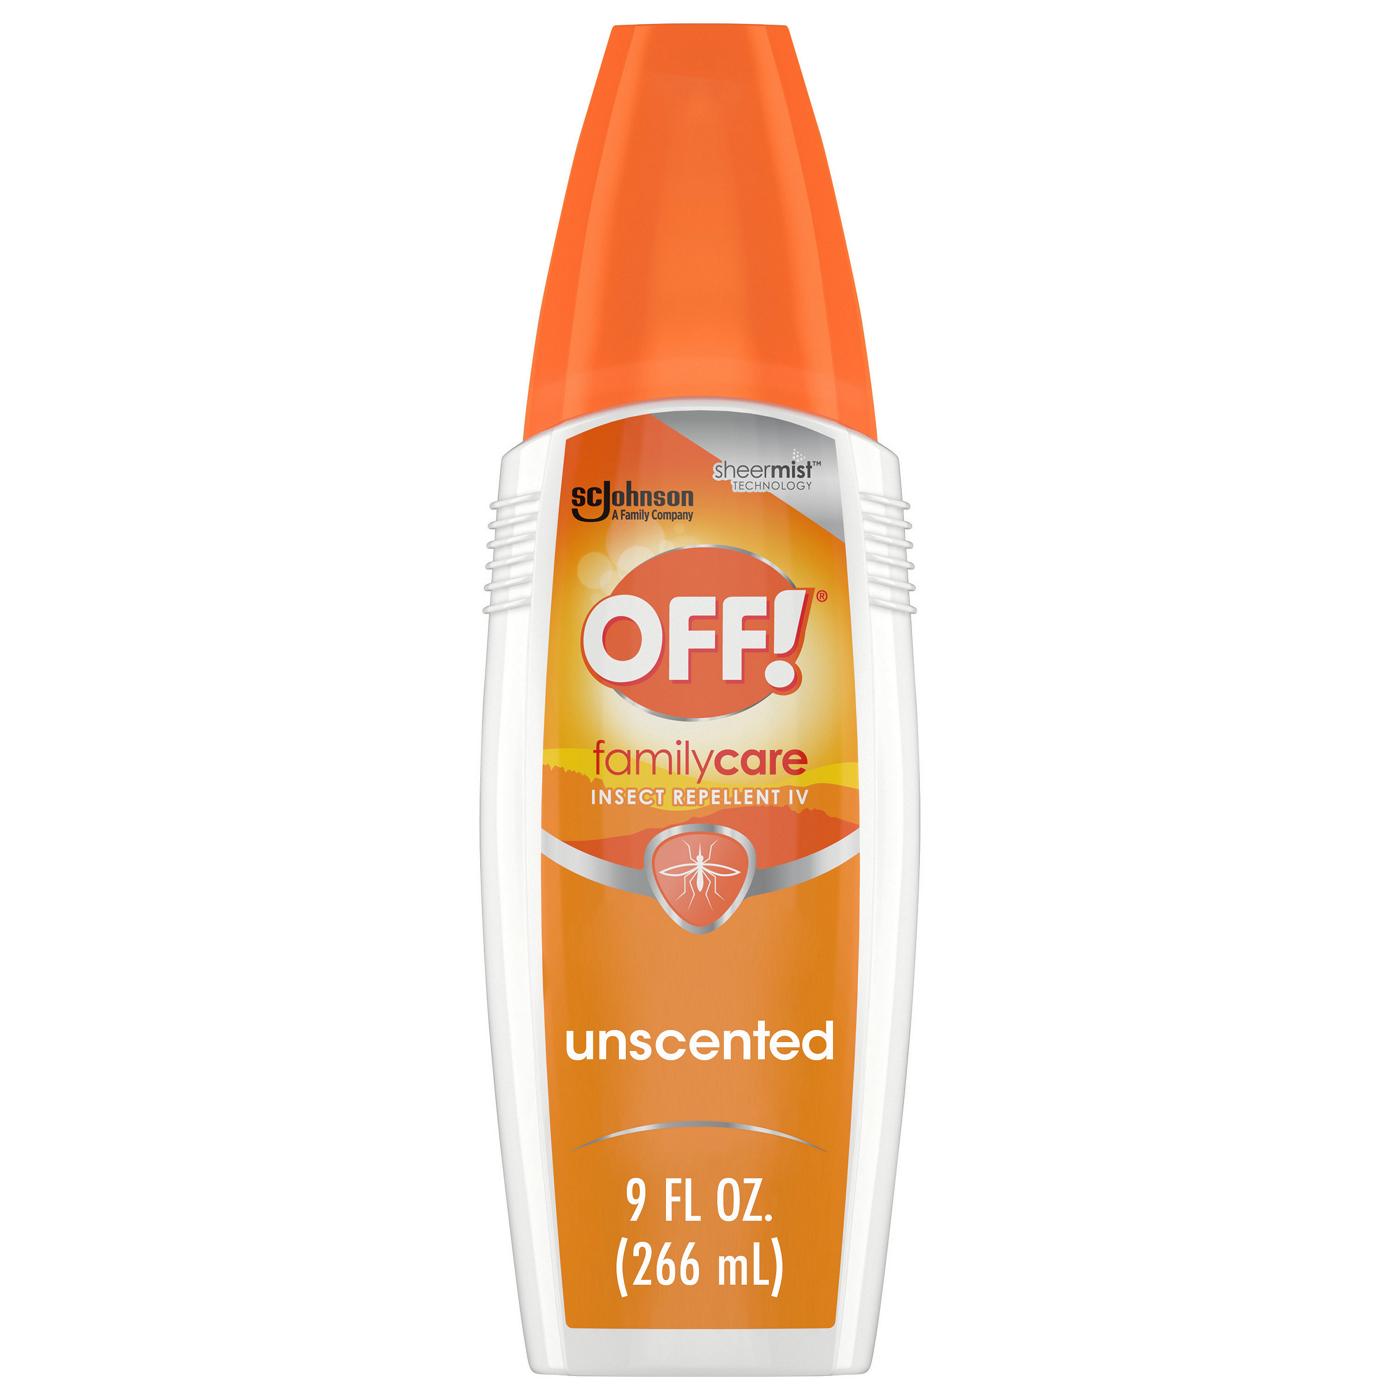 Off! FamilyCare Unscented Insect Repellent IV Spray; image 1 of 2